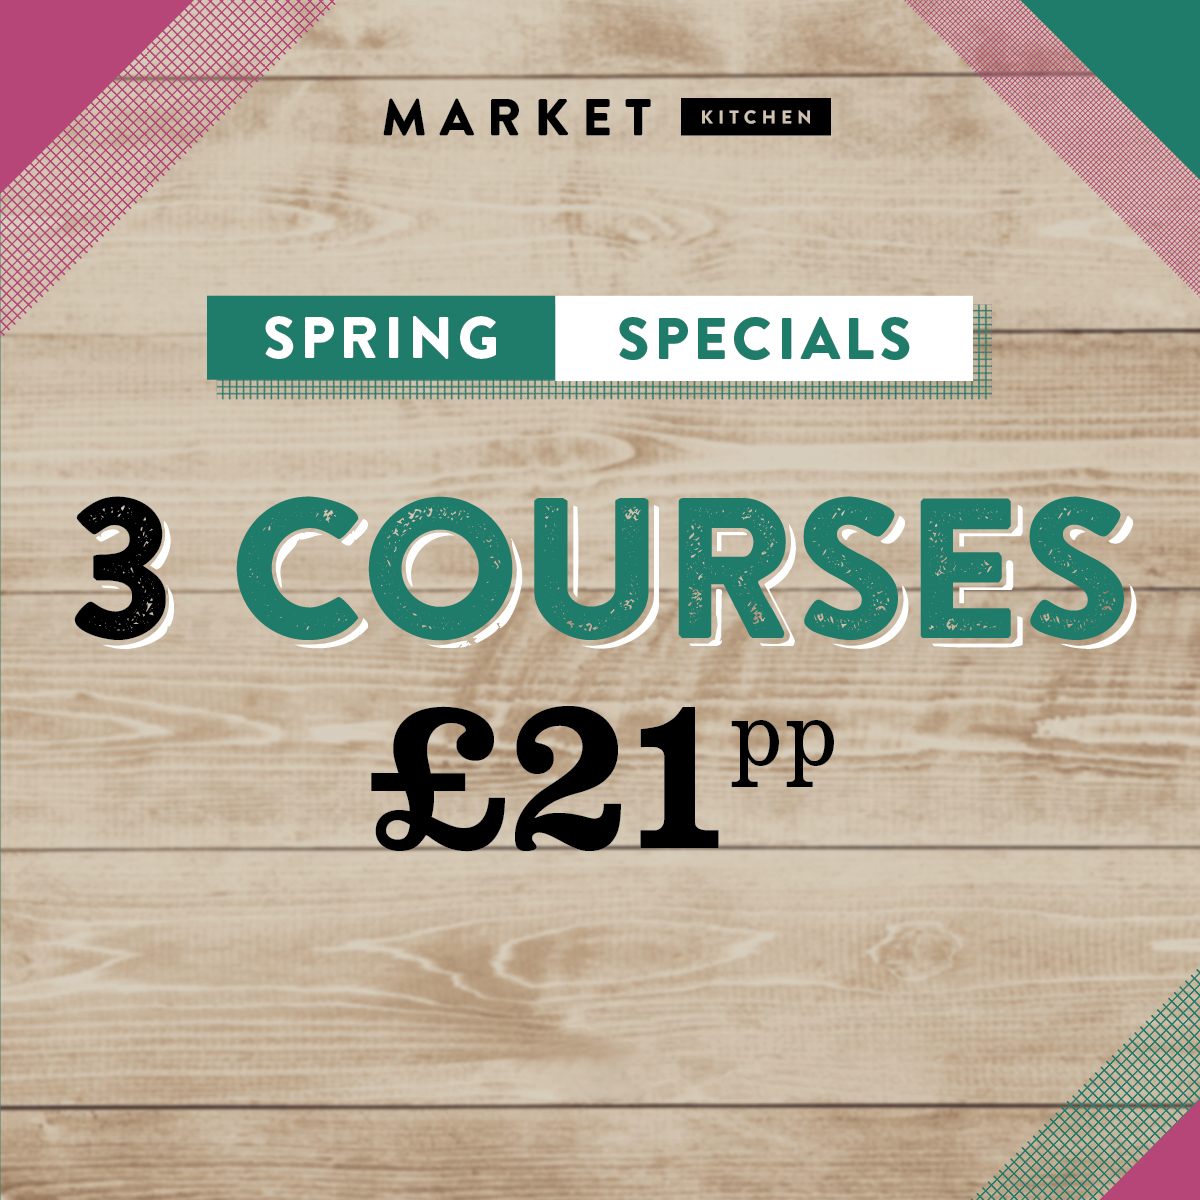 Spring has sprung - hurrah! Our new 3 course menu is packed full of fresh spring flavours making the most of this cheery season's products. £21 for three courses, £18 for two. #MarketKitchen #Spring #Healthy #Newdishes #Fresh